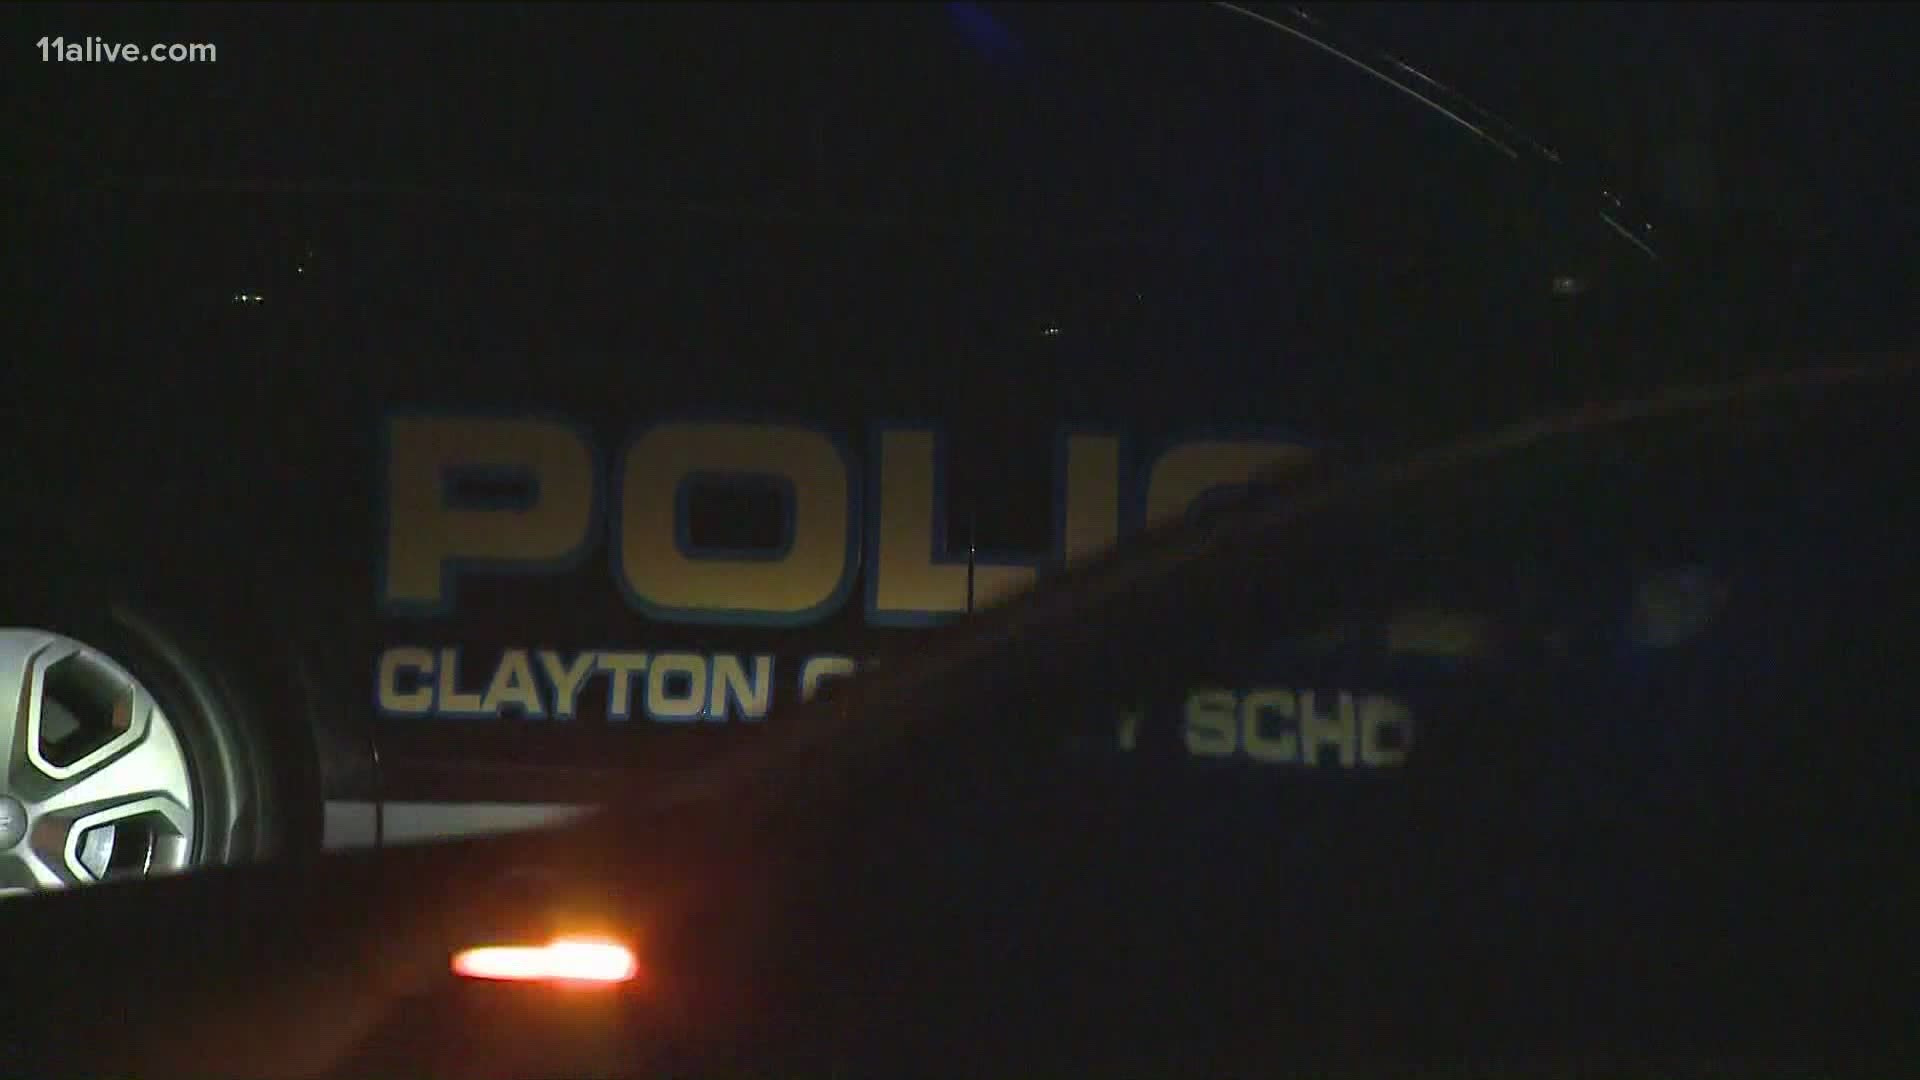 One person has been shot and killed at Riverdale High School, according to Clayton County authorities.